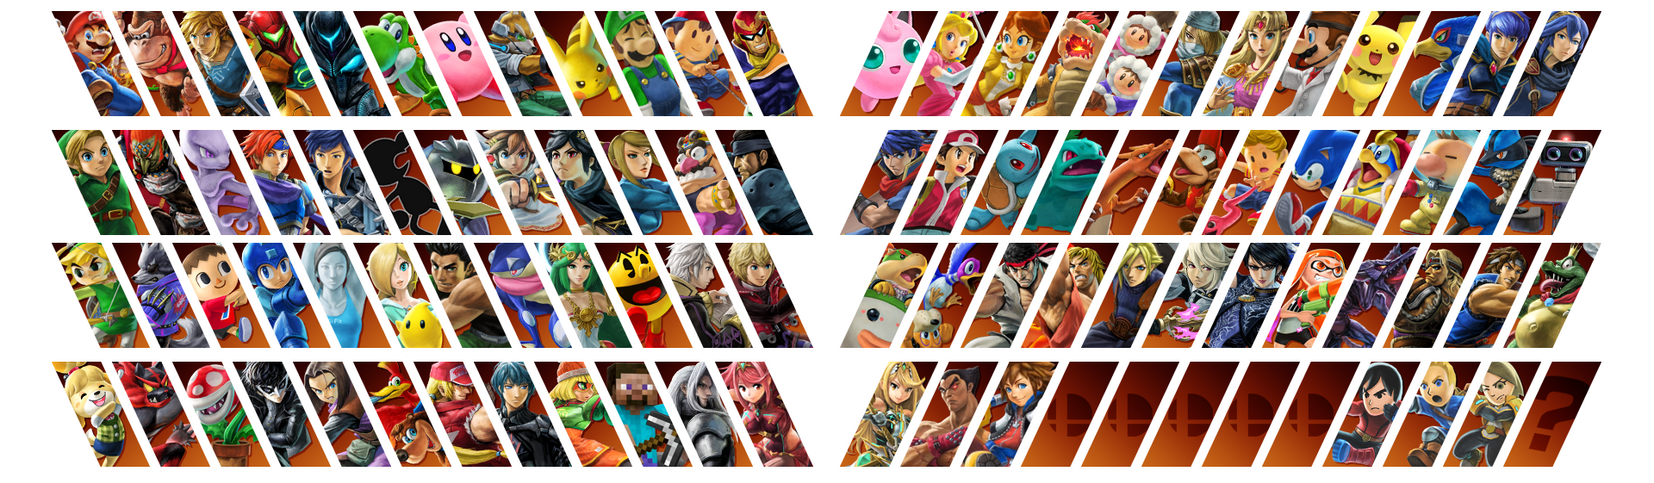 SSB: Character Select Screen Fighter Panels V4